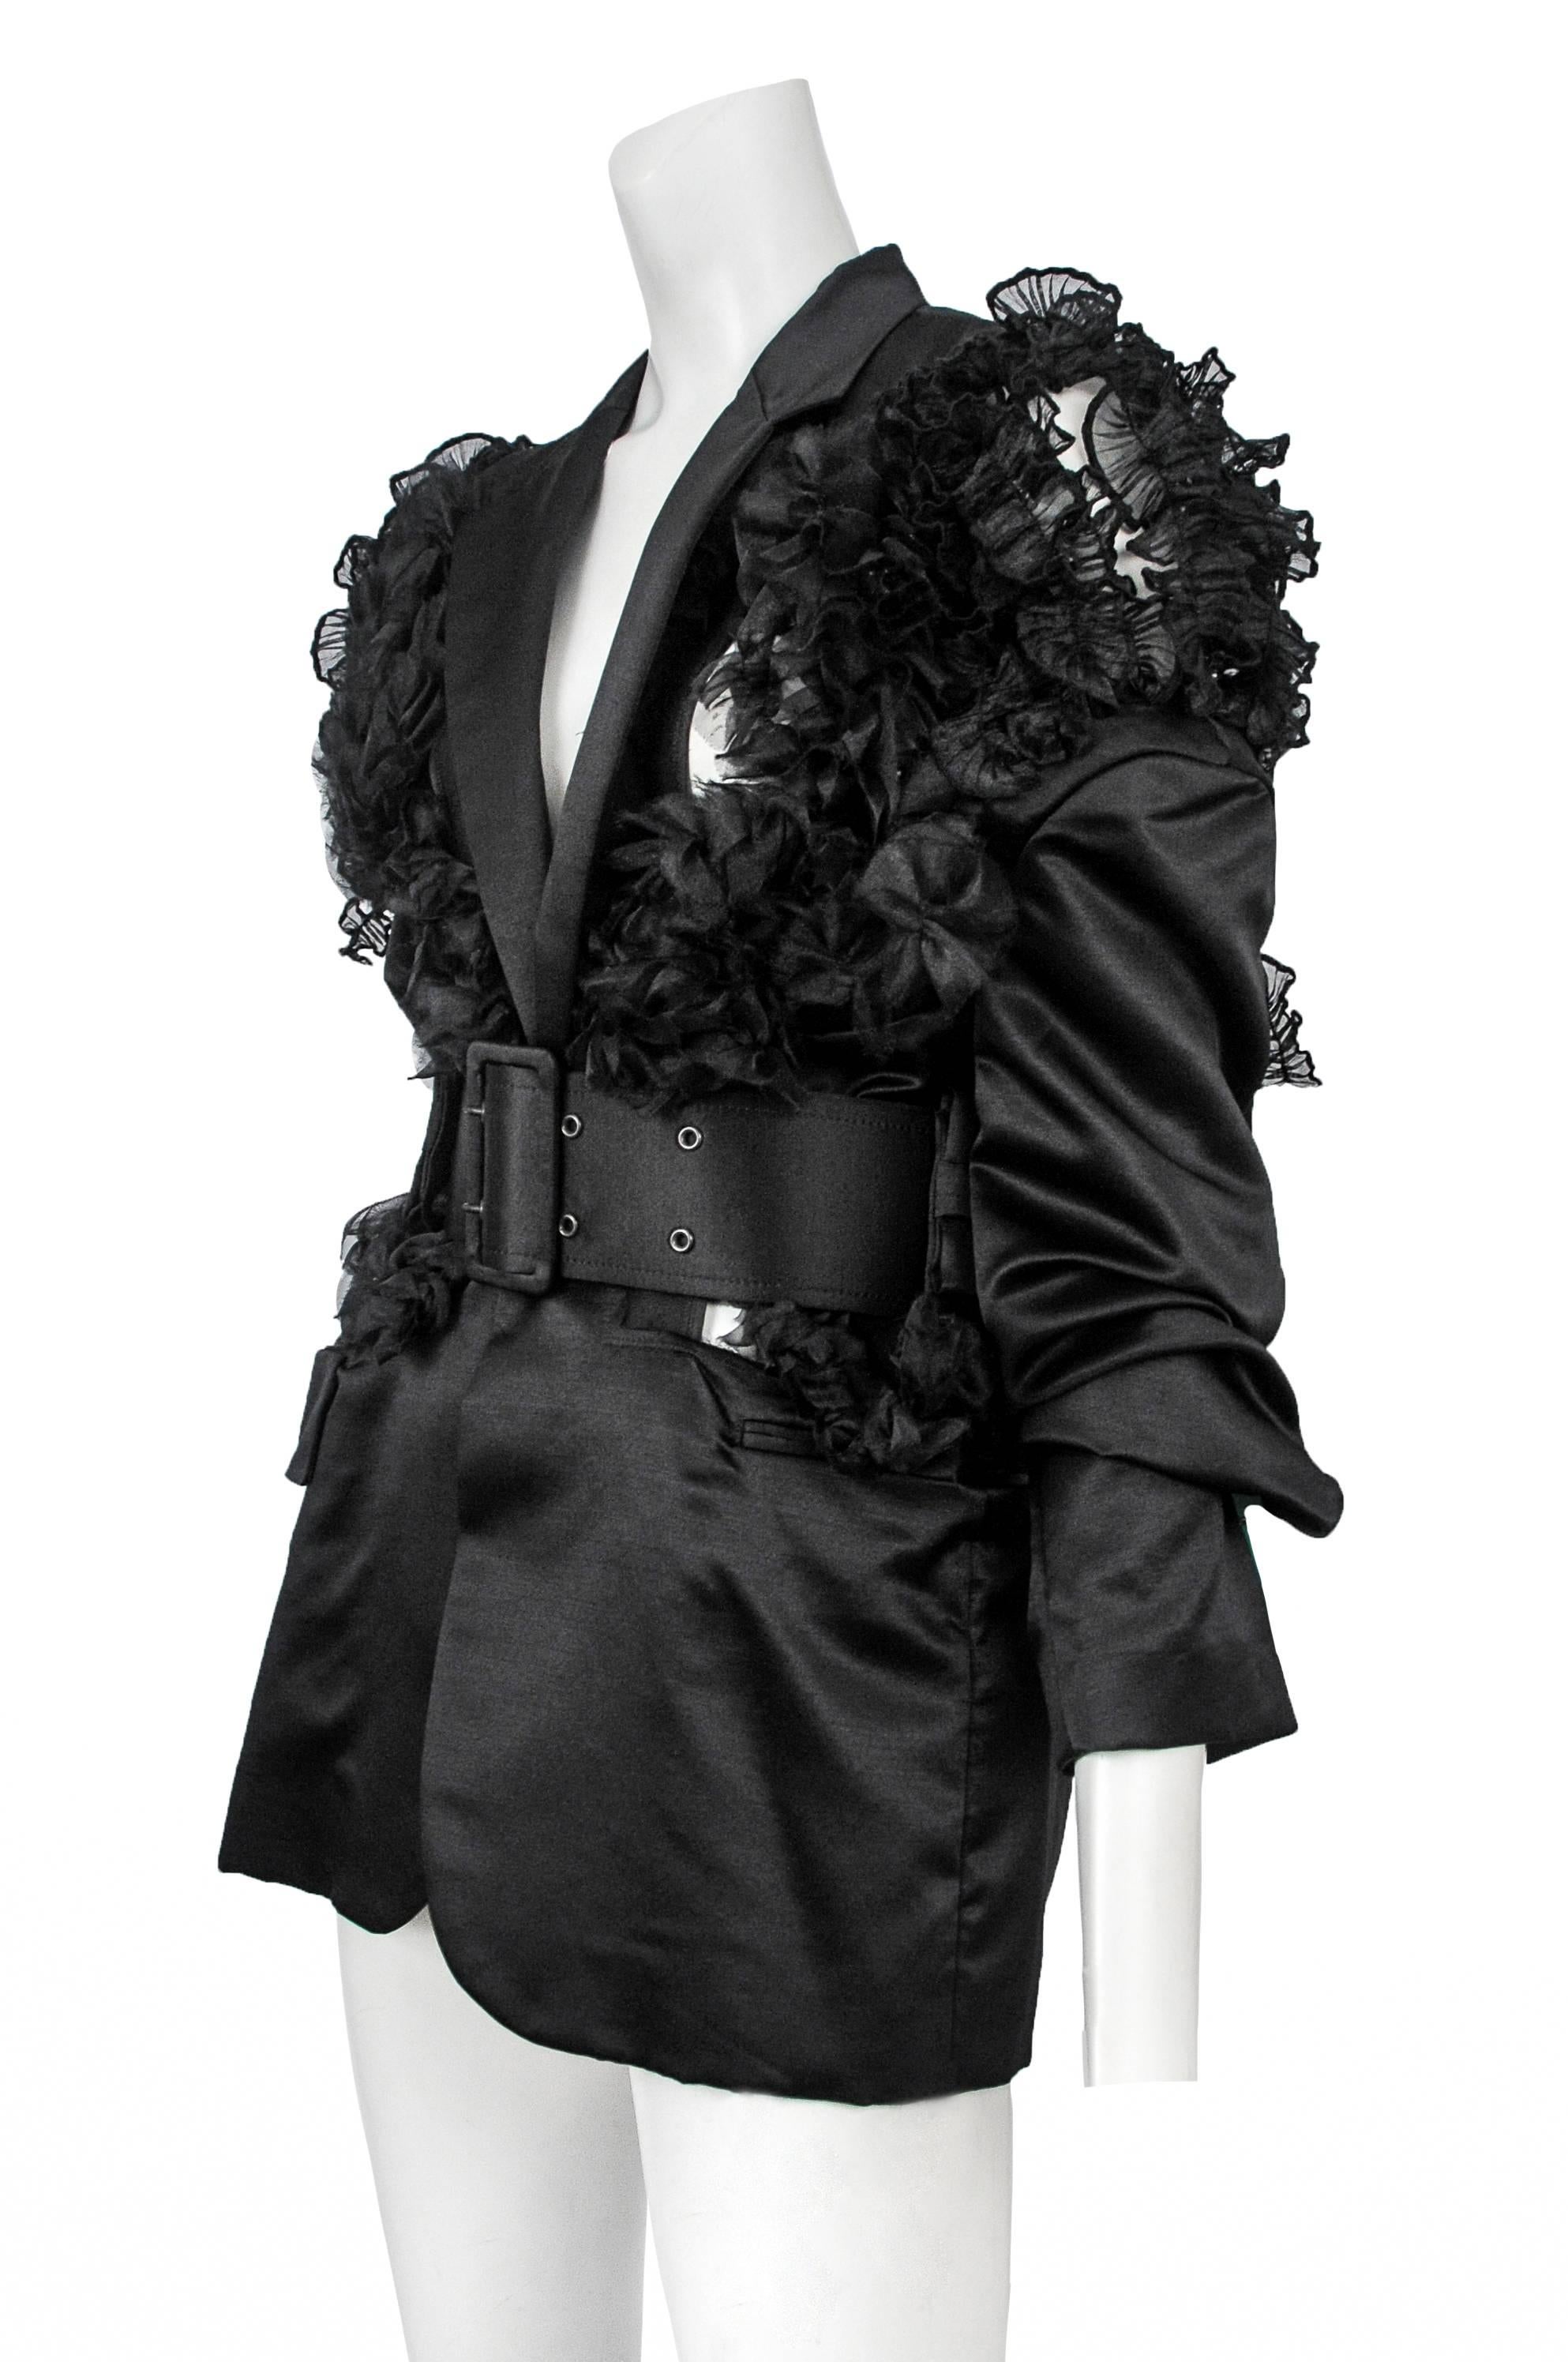 Vintage Comme des Garcons black satin pointed lapel blazer featuring ruffle organza detailing at the shoulders and torso and a matching wide buckle satin belt. Circa 2006.